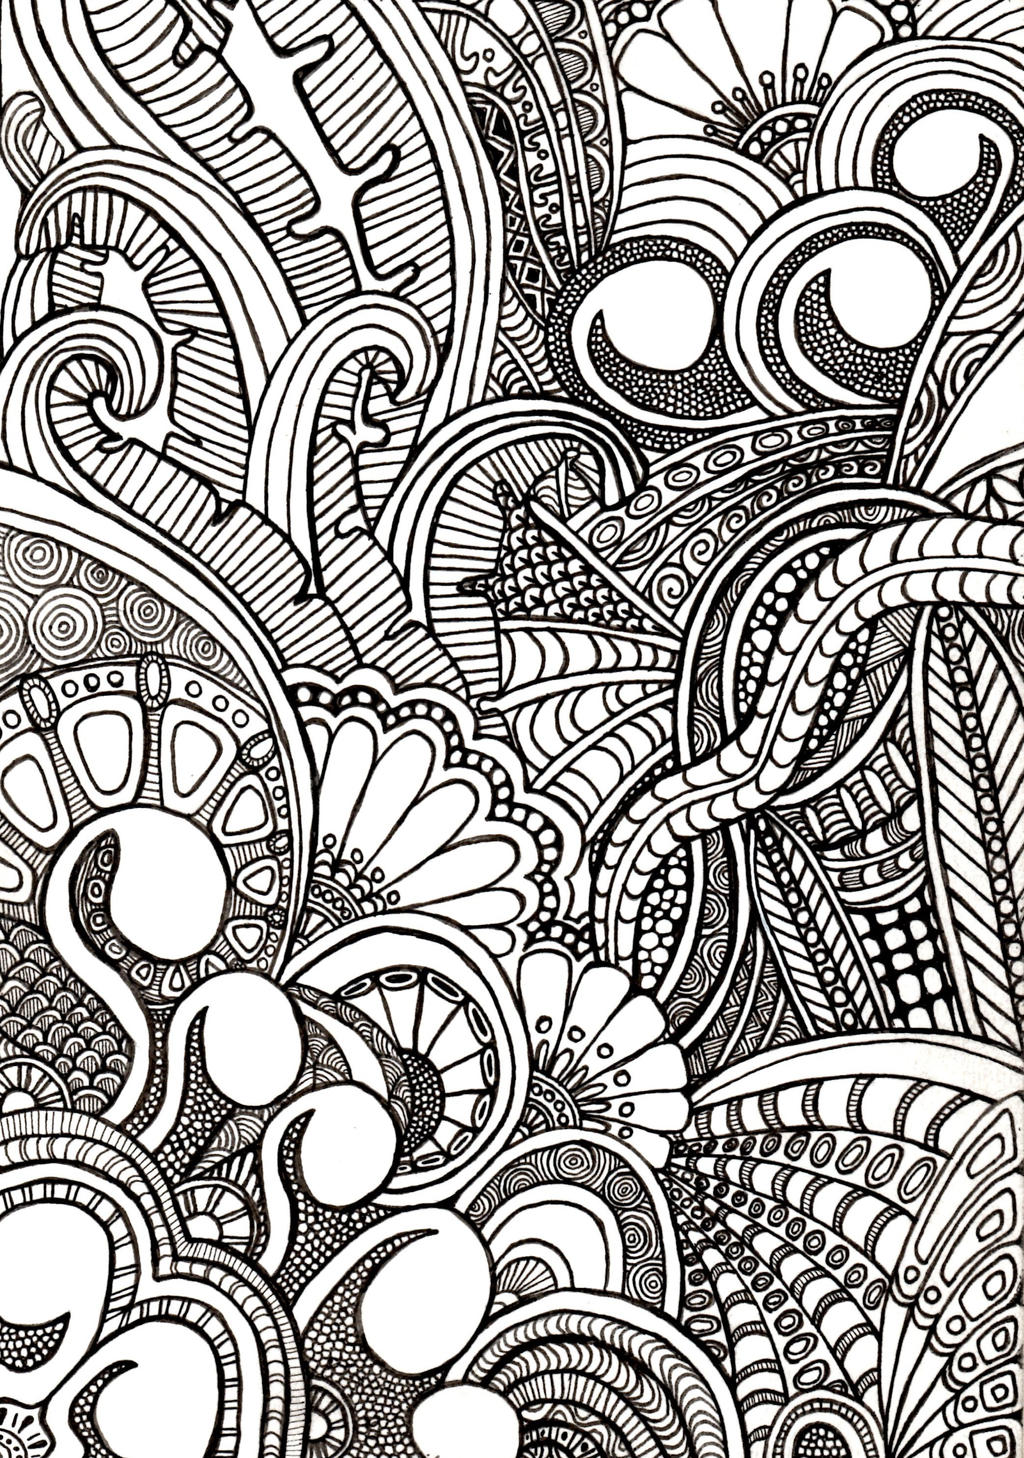 Coloring Book Page by ambercamiart on DeviantArt